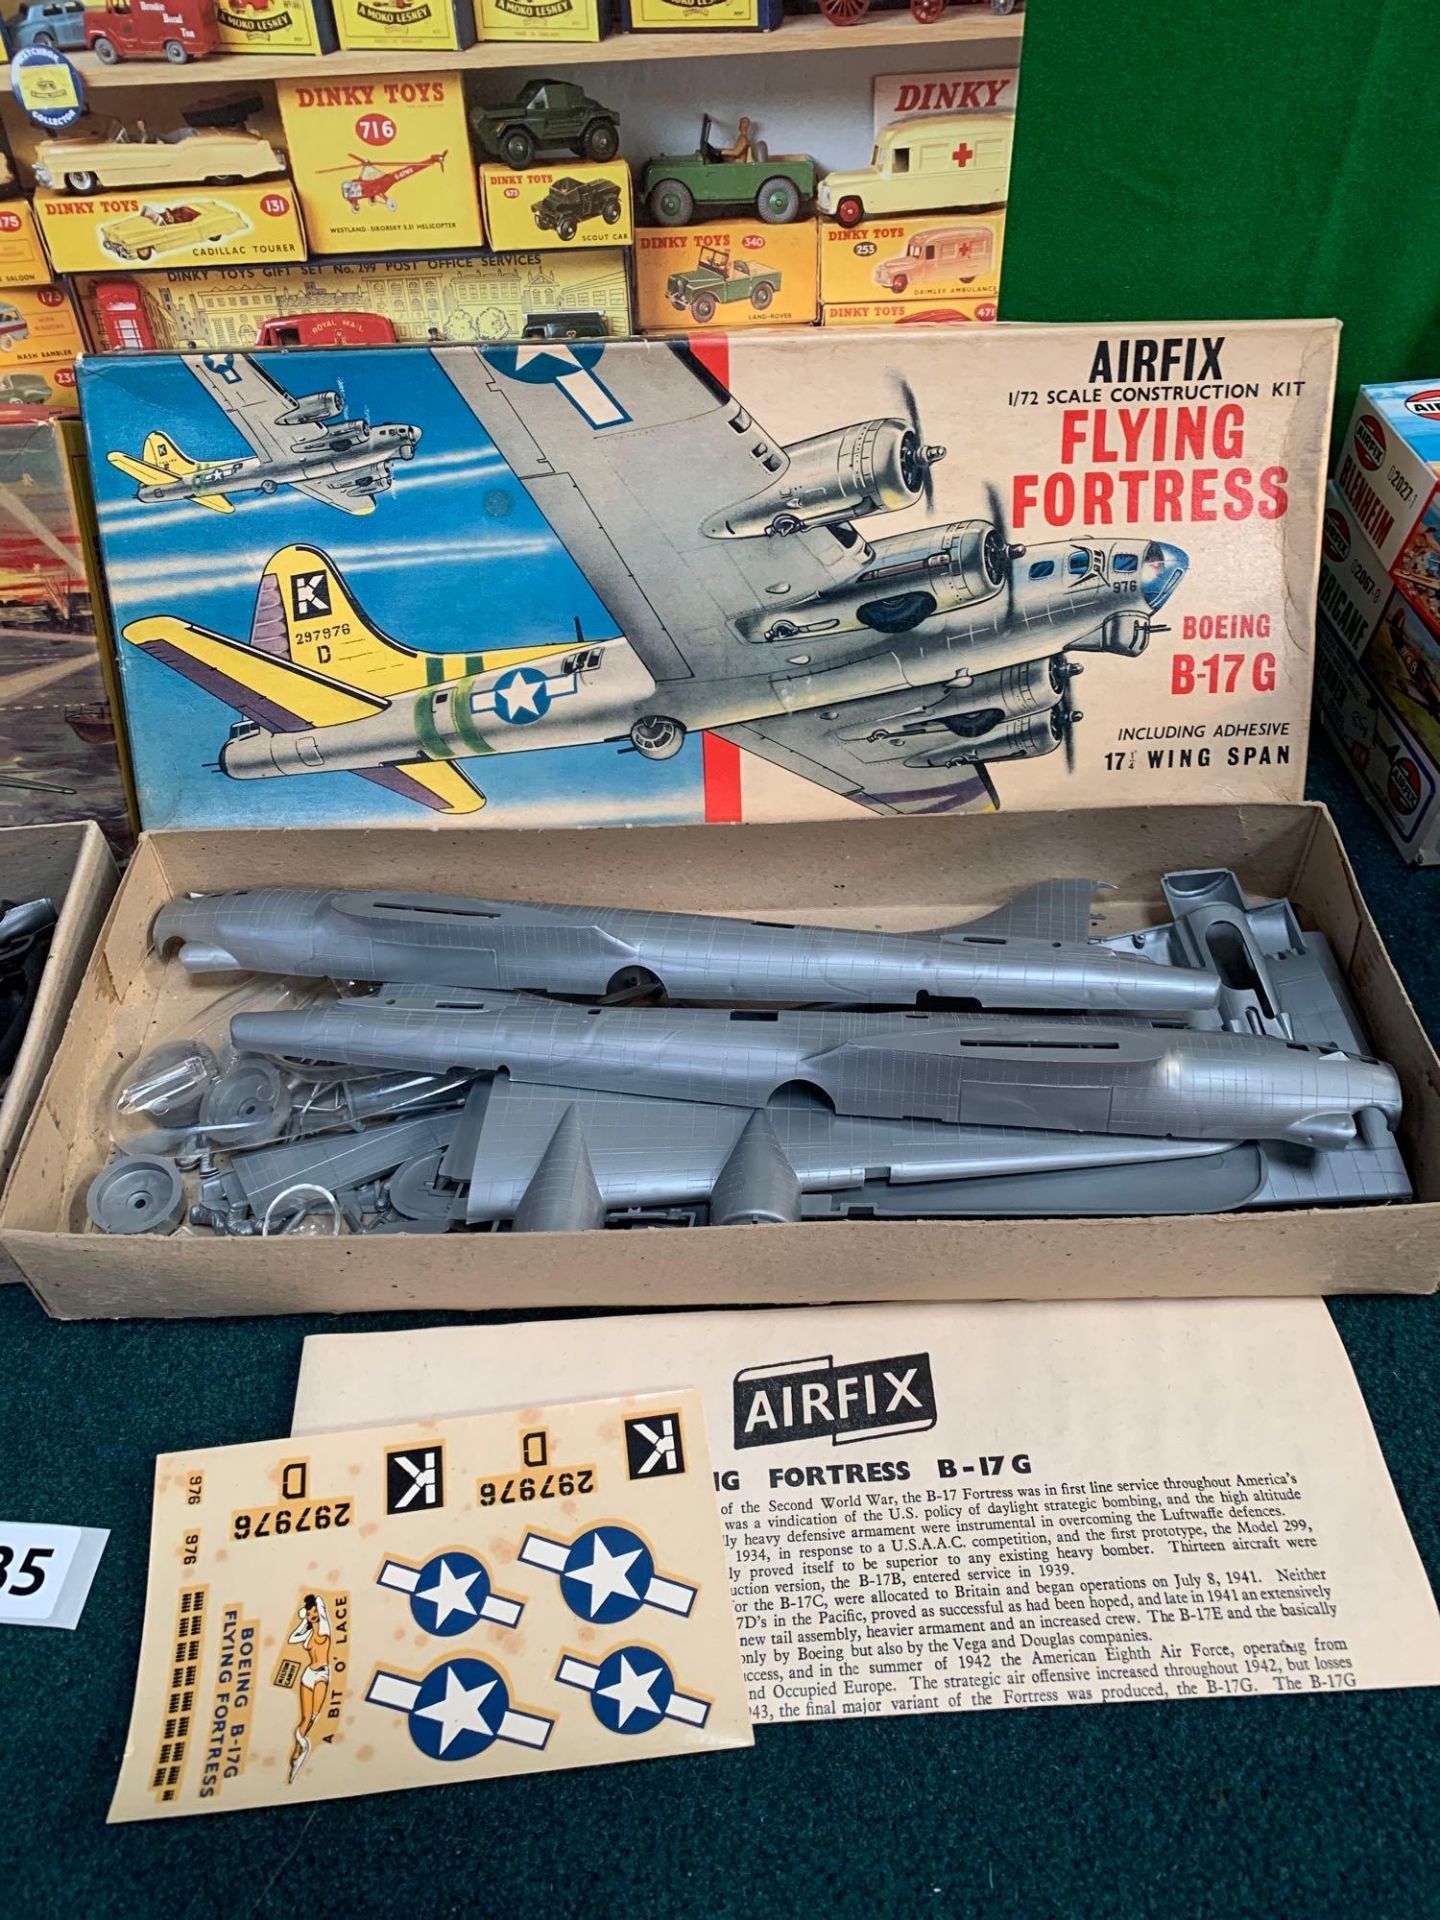 Model Kits Includes Airfix Vickers Armstrong Wellington B3 1/72 Model Kit 04001 And Airfix Boeing - Image 8 of 8